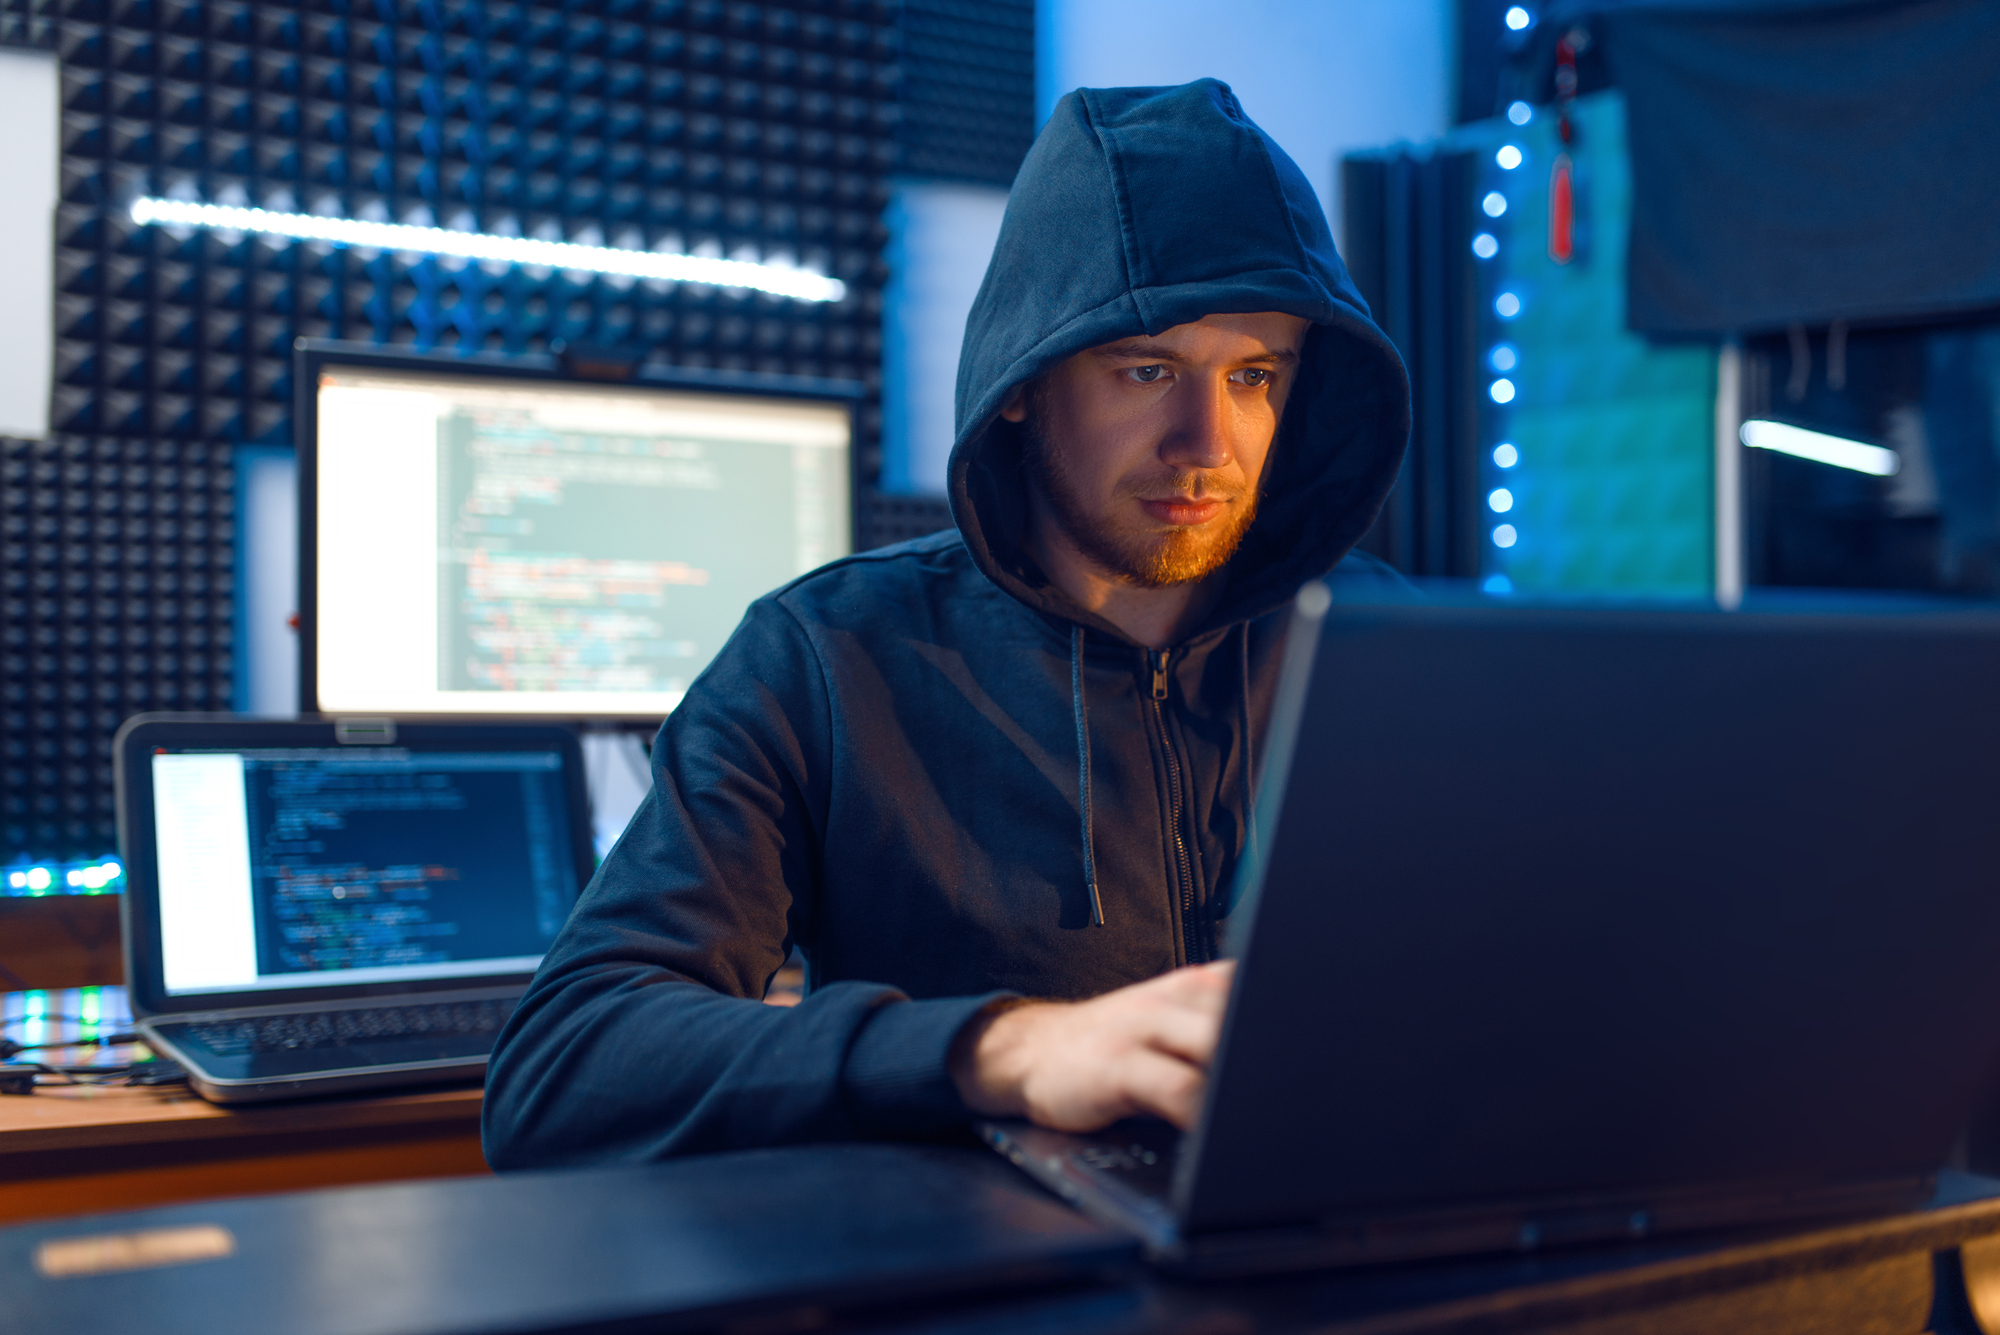 Hacker in hood at his workplace with laptop and desktop PC, password or account hacking, darknet user. Internet spy, crime lifestyle, risk job, network criminal